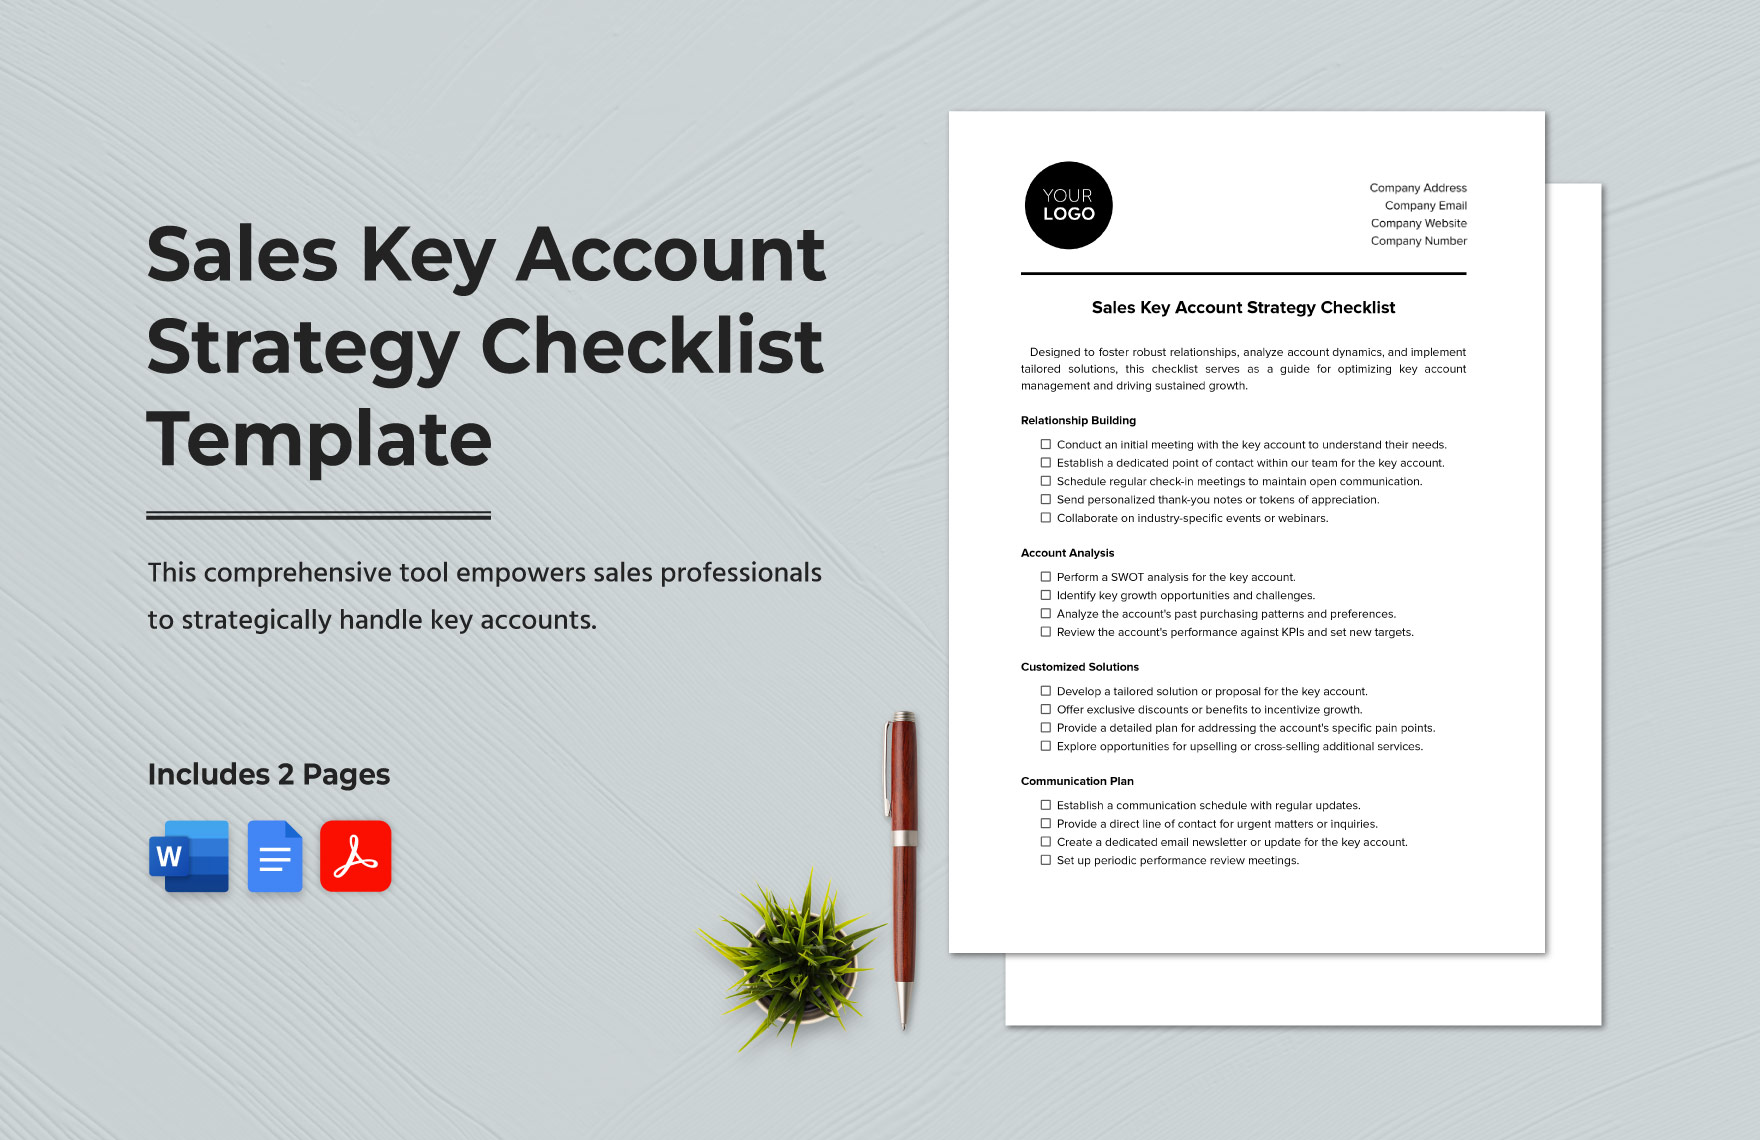 Sales Key Account Strategy Checklist Template in Word, Google Docs, PDF